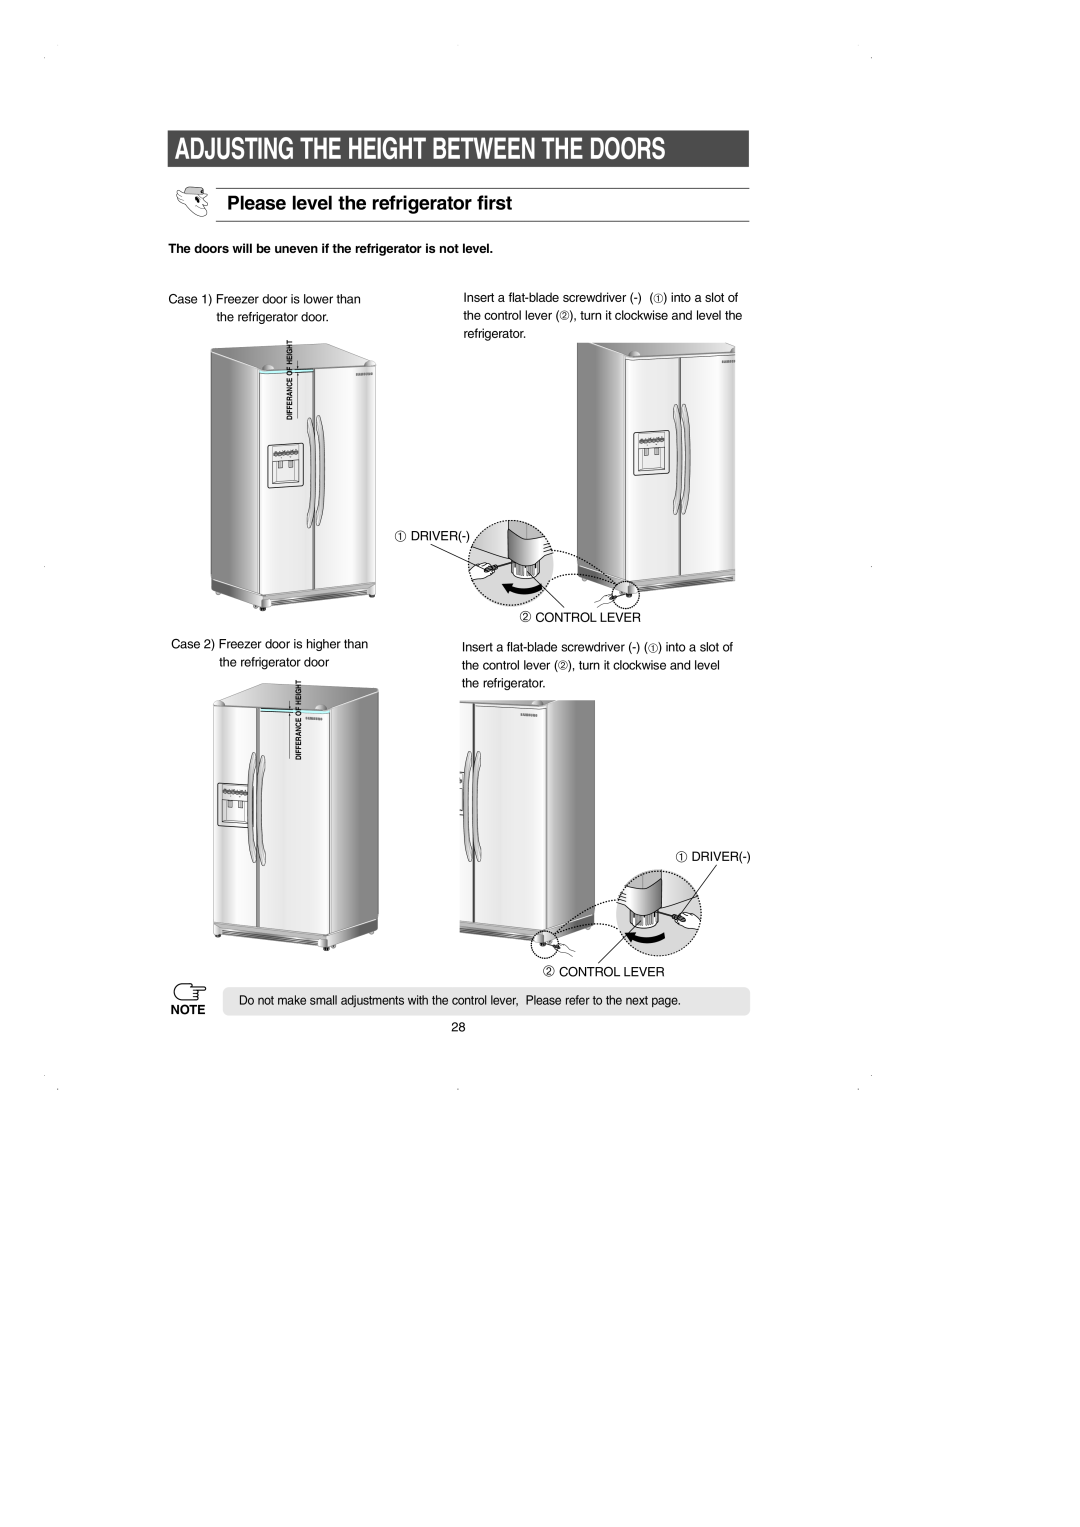 Samsung RS2531 installation instructions ➀DRIVER, ➁CONTROL LEVER, ➁ CONTROL LEVER, Please level the refrigerator first 